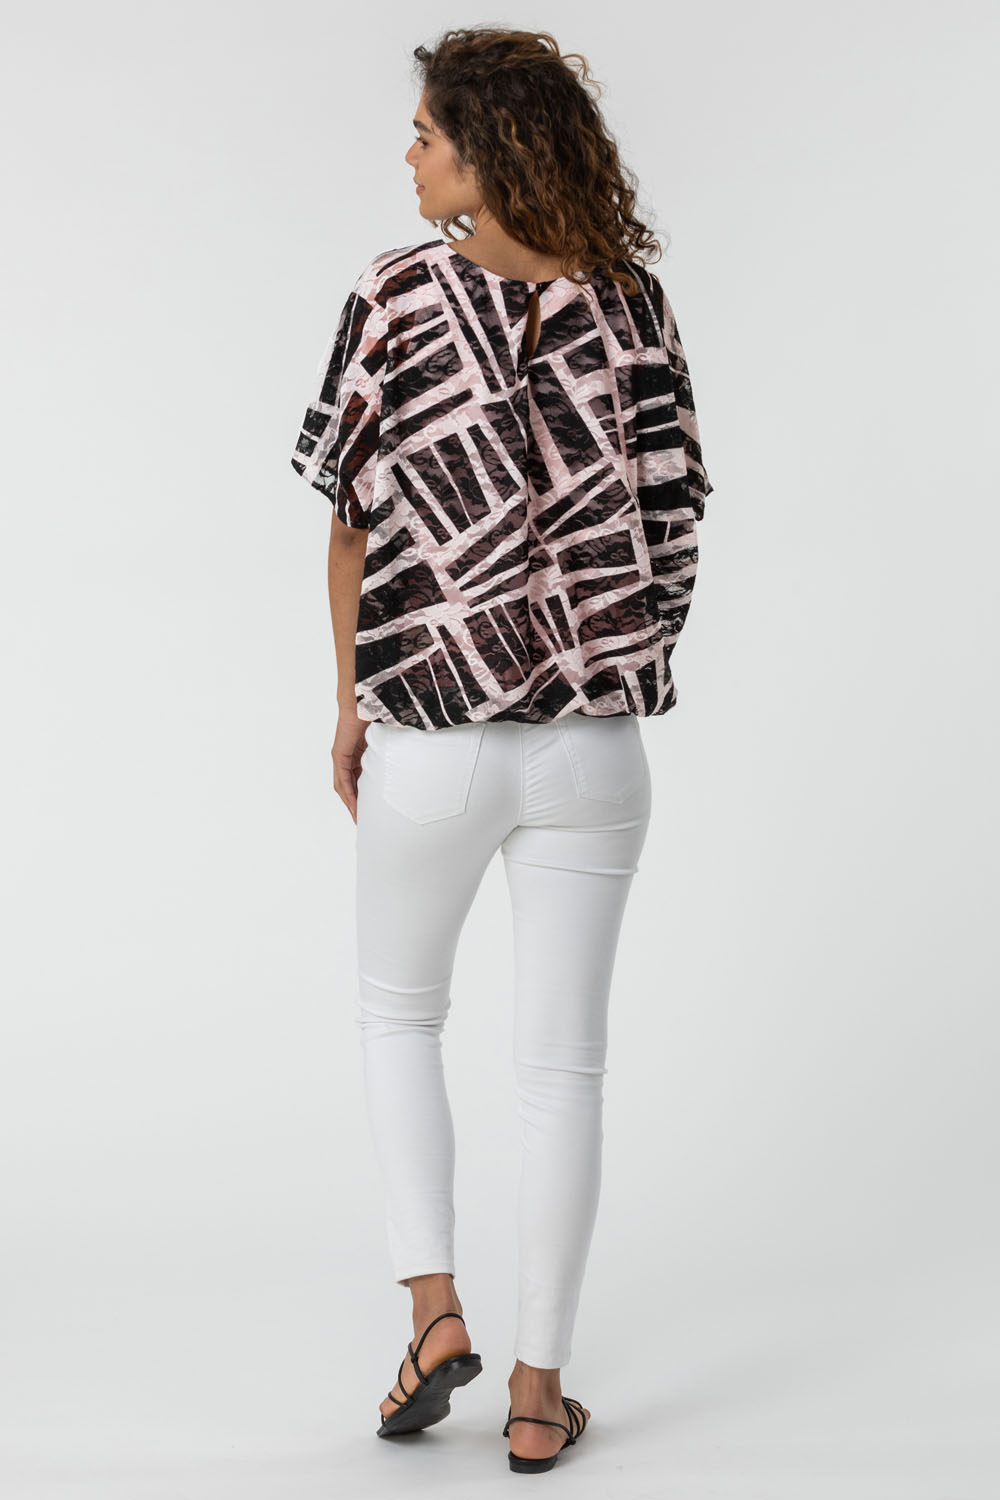 PINK Abstract Print Stretch Jersey Top, Image 2 of 4